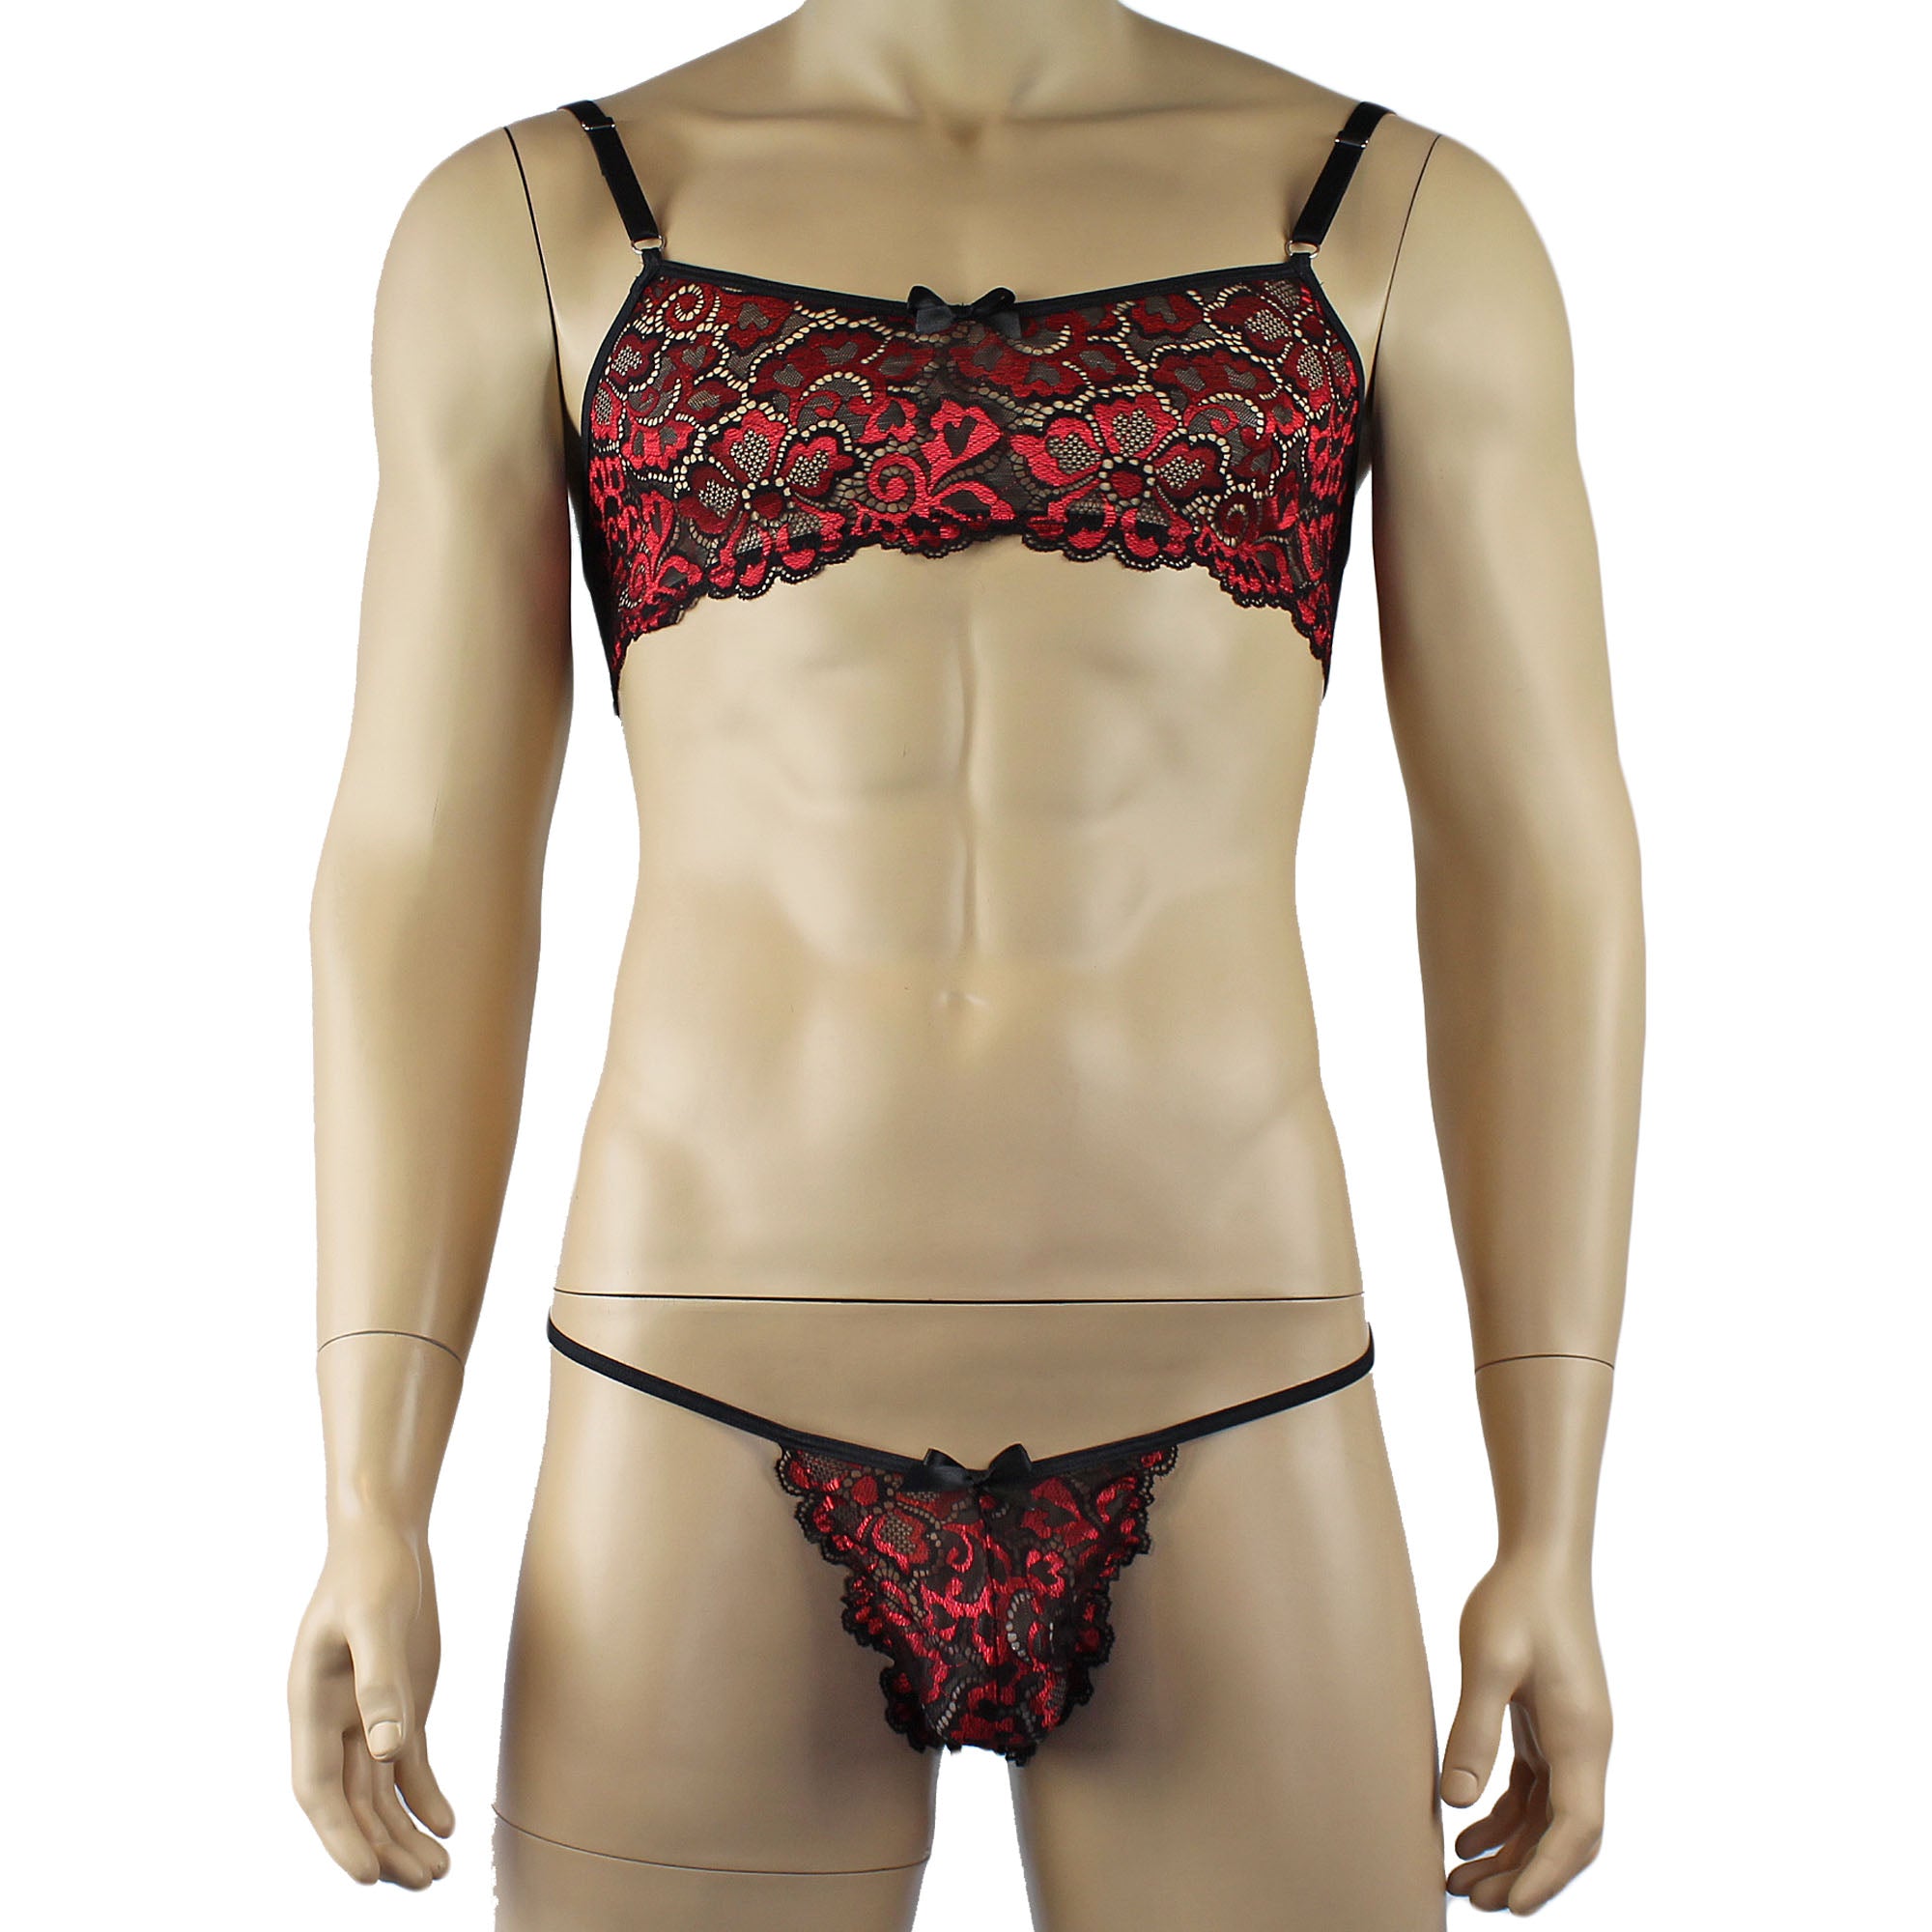 Mens Sweetheart Scalloped Shiny Lace Bra Top and Panty Red